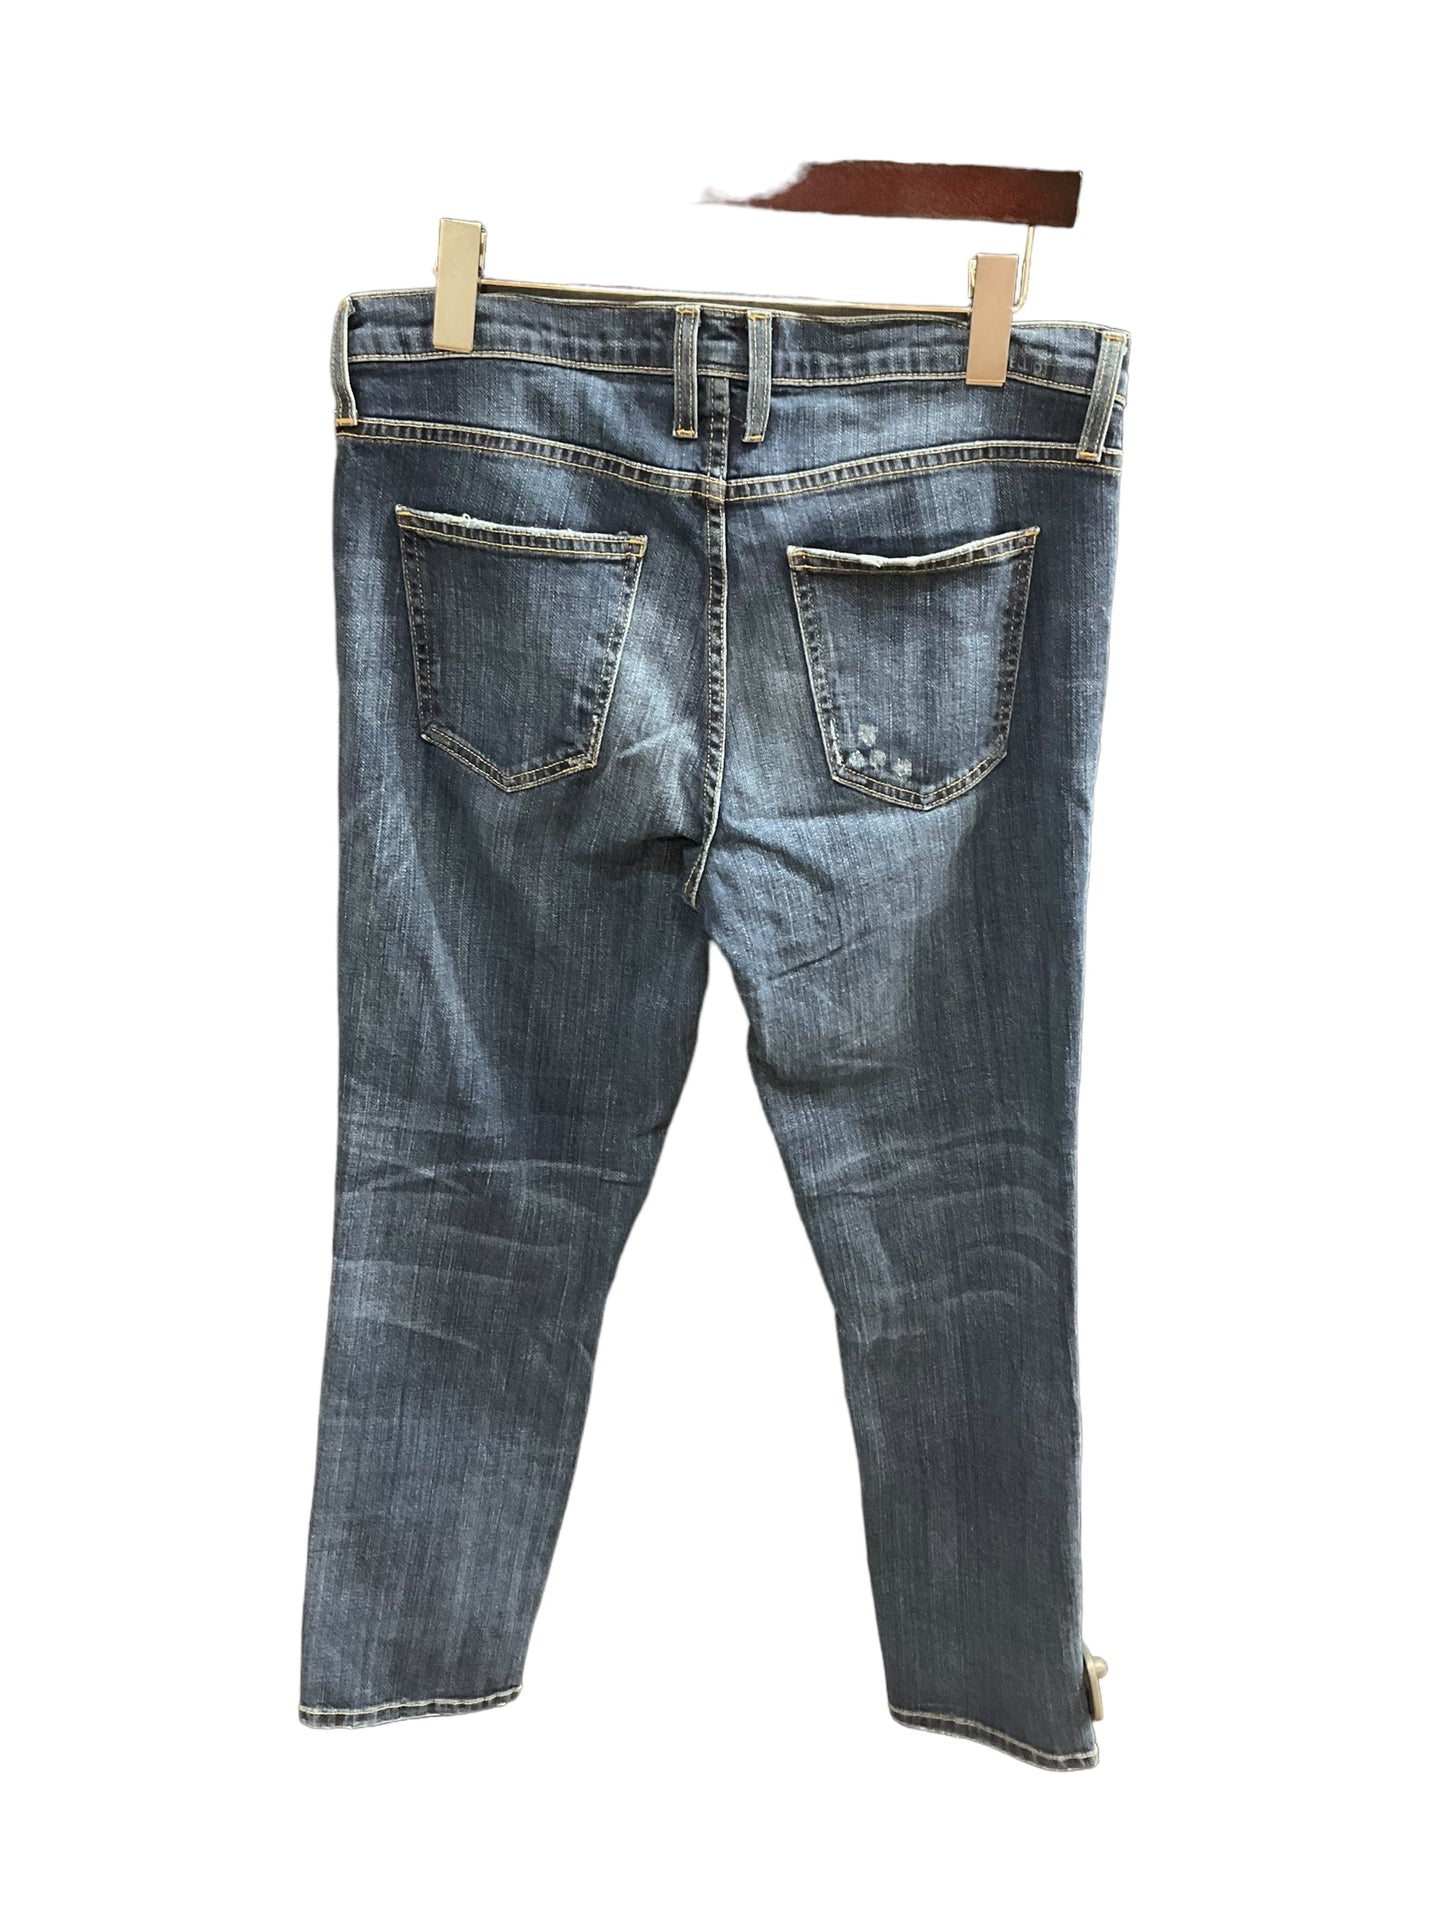 Jeans Boot Cut By Current Elliott  Size: 6